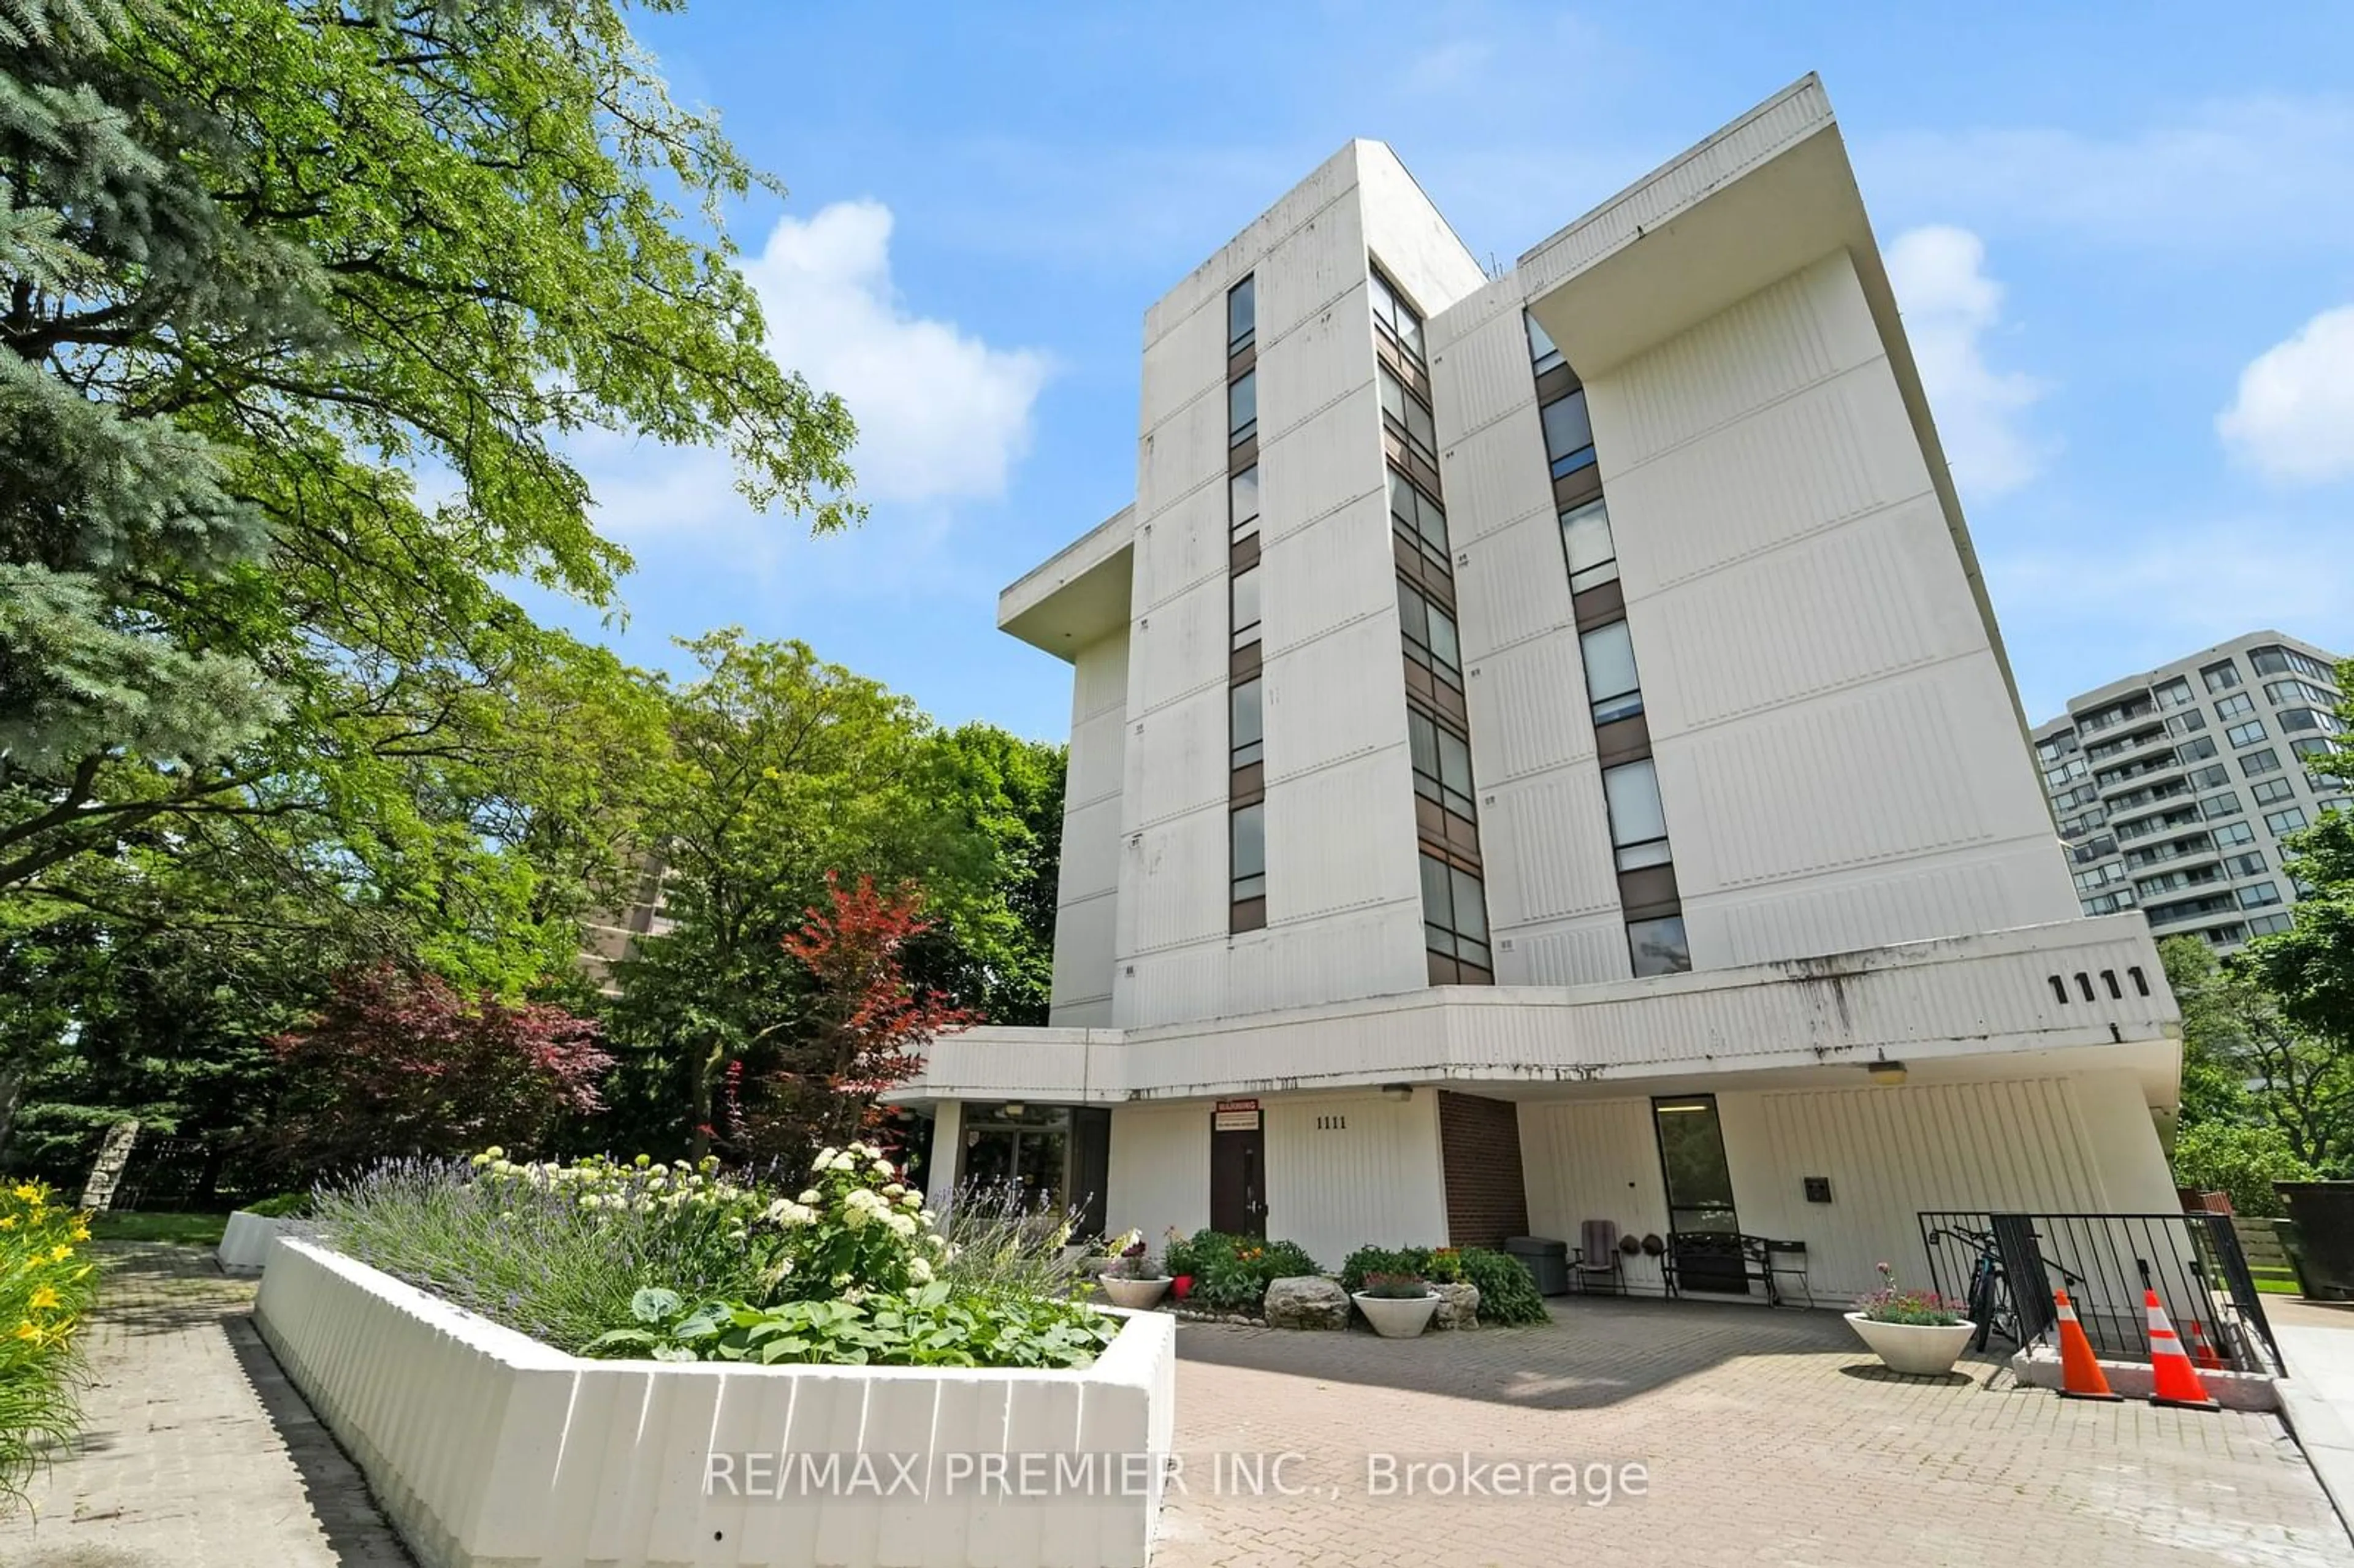 A pic from exterior of the house or condo for 1111 Steeles Ave #303, Toronto Ontario M2R 3M9